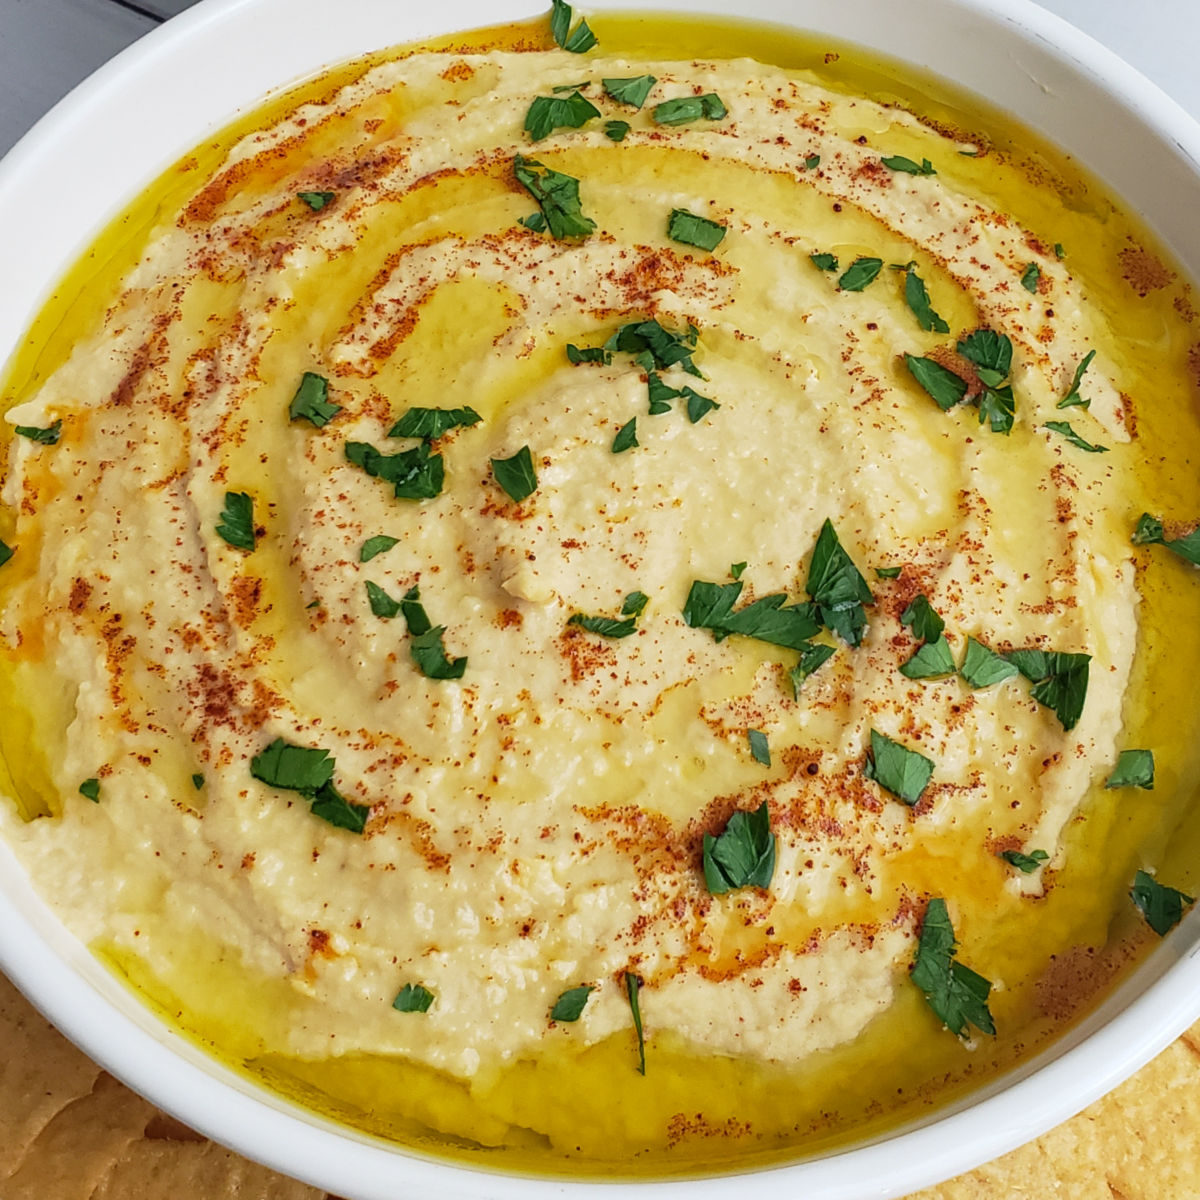 Delicious hummus garnished with extra virgin olive oil, fresh parsley and paprika, served in shallow white serving bowl with crackers.